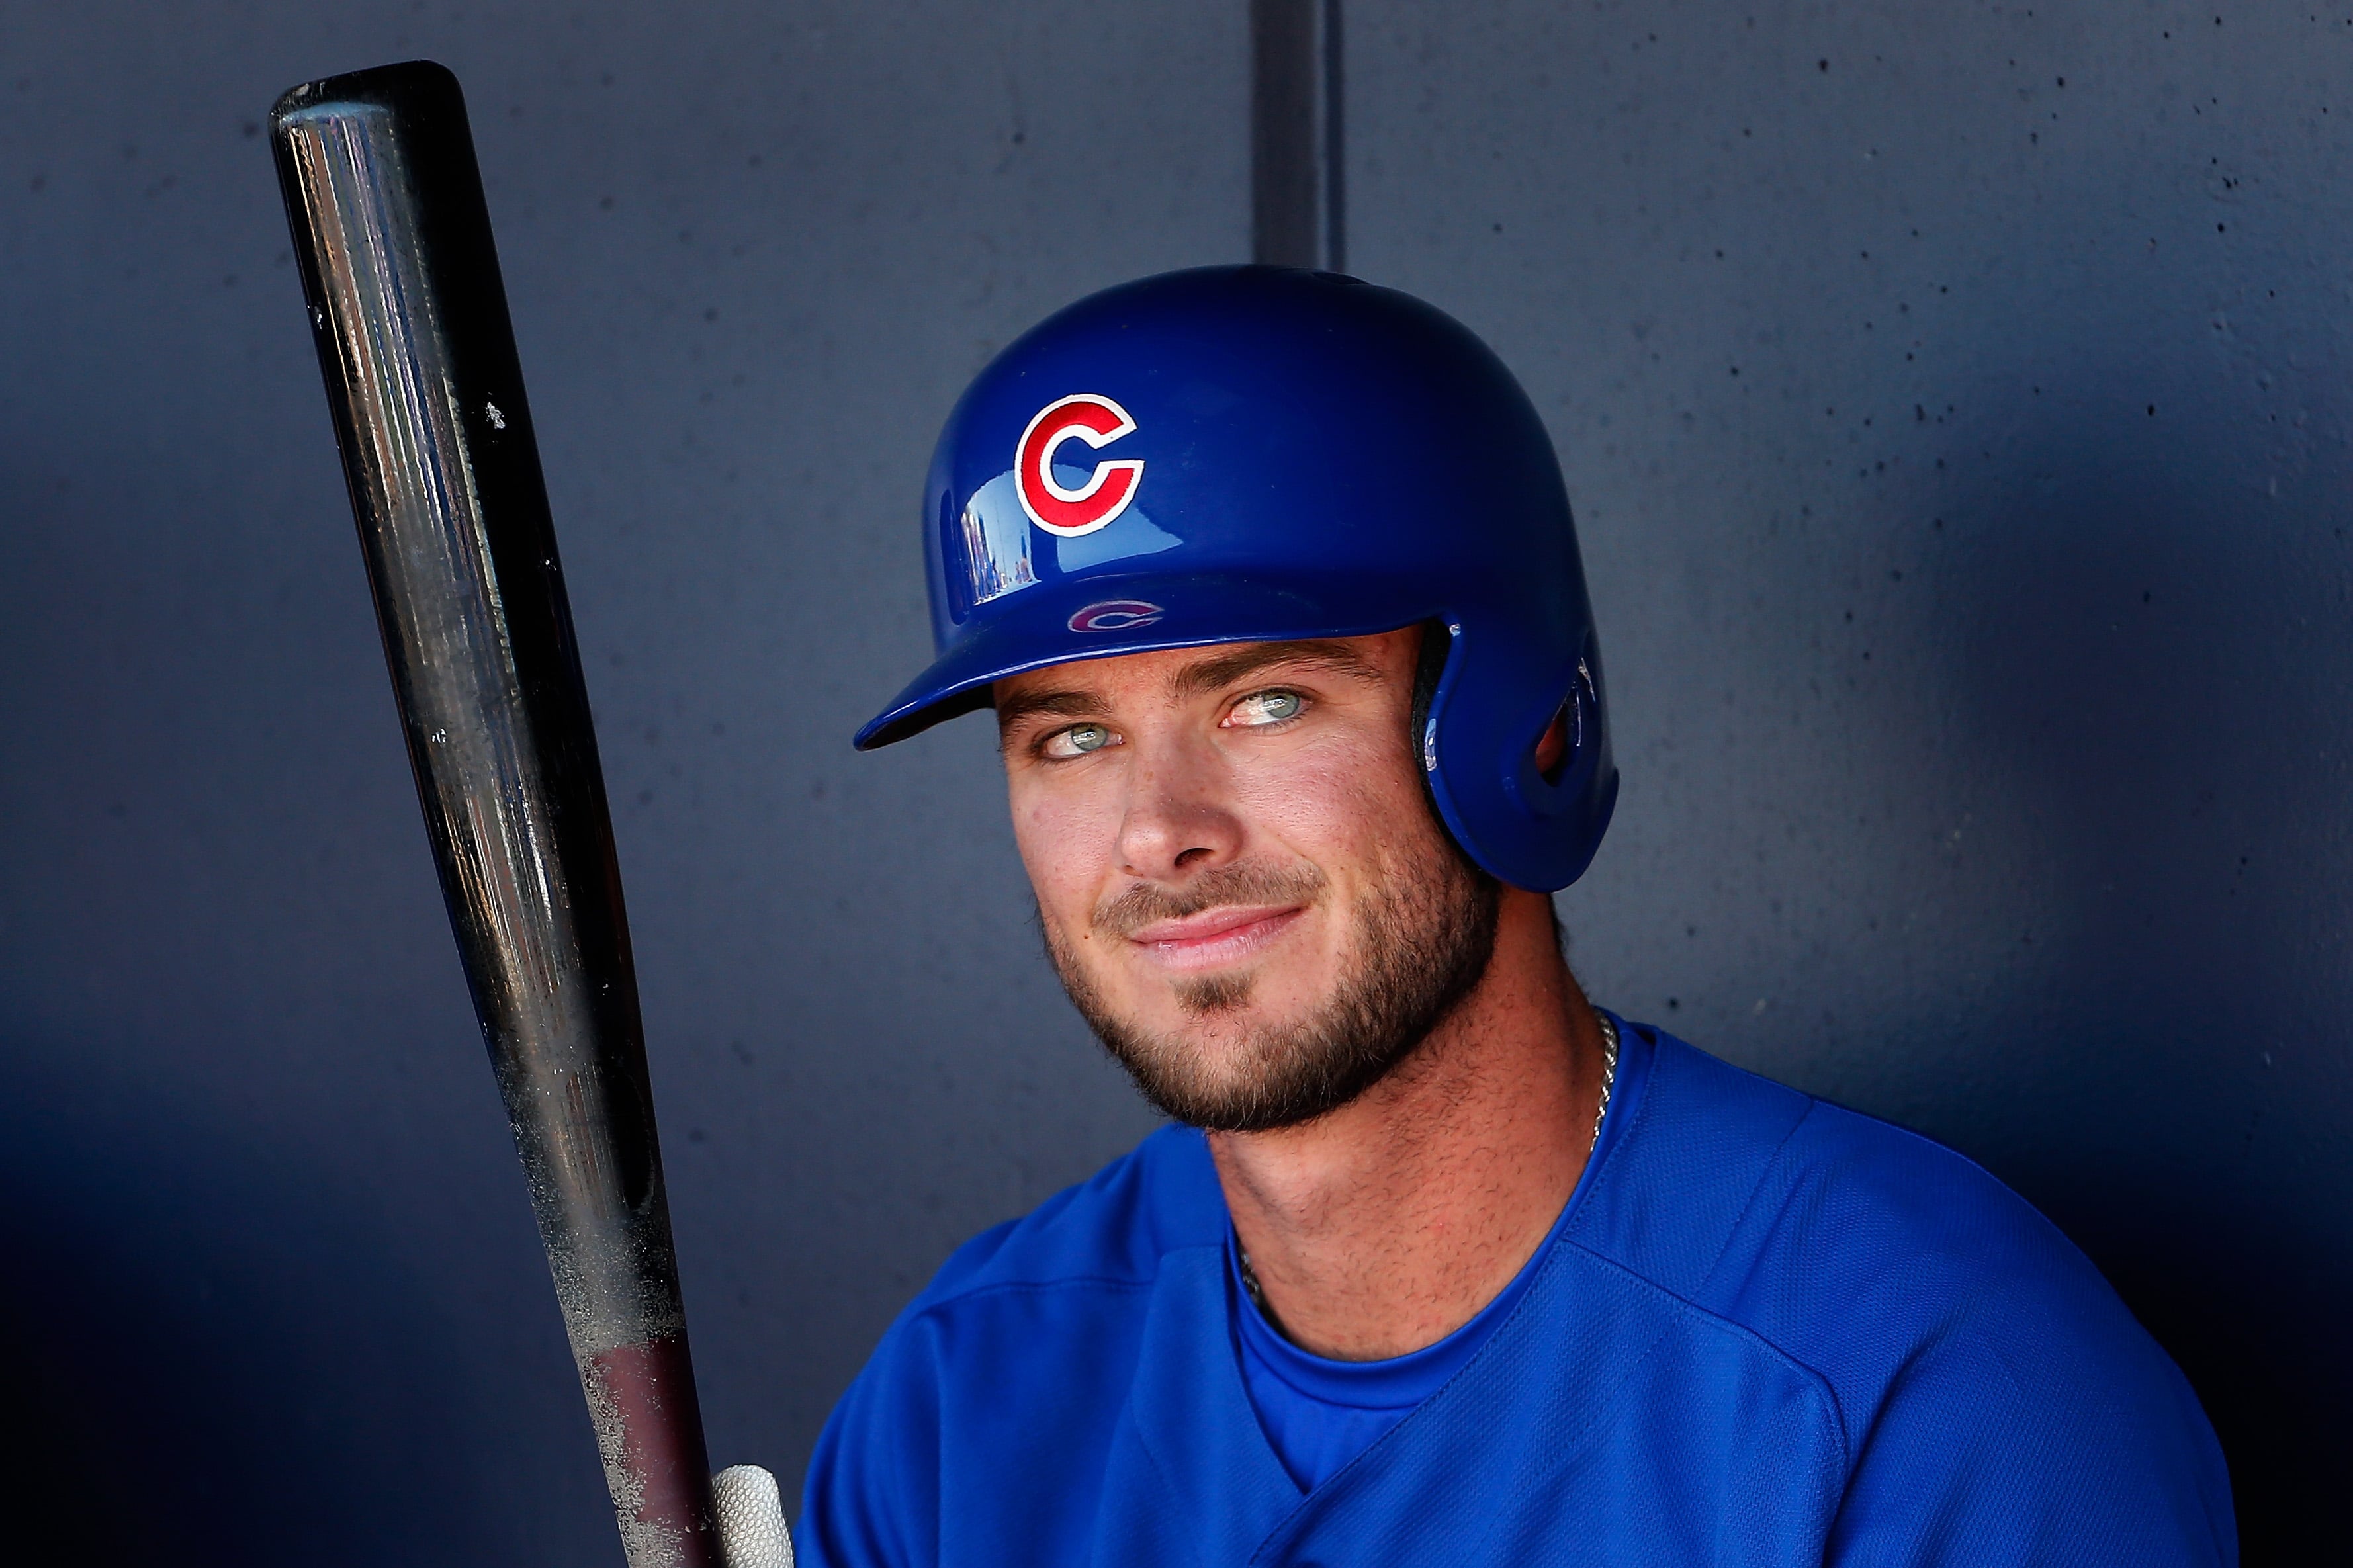 Sexy Kris Bryant Pictures